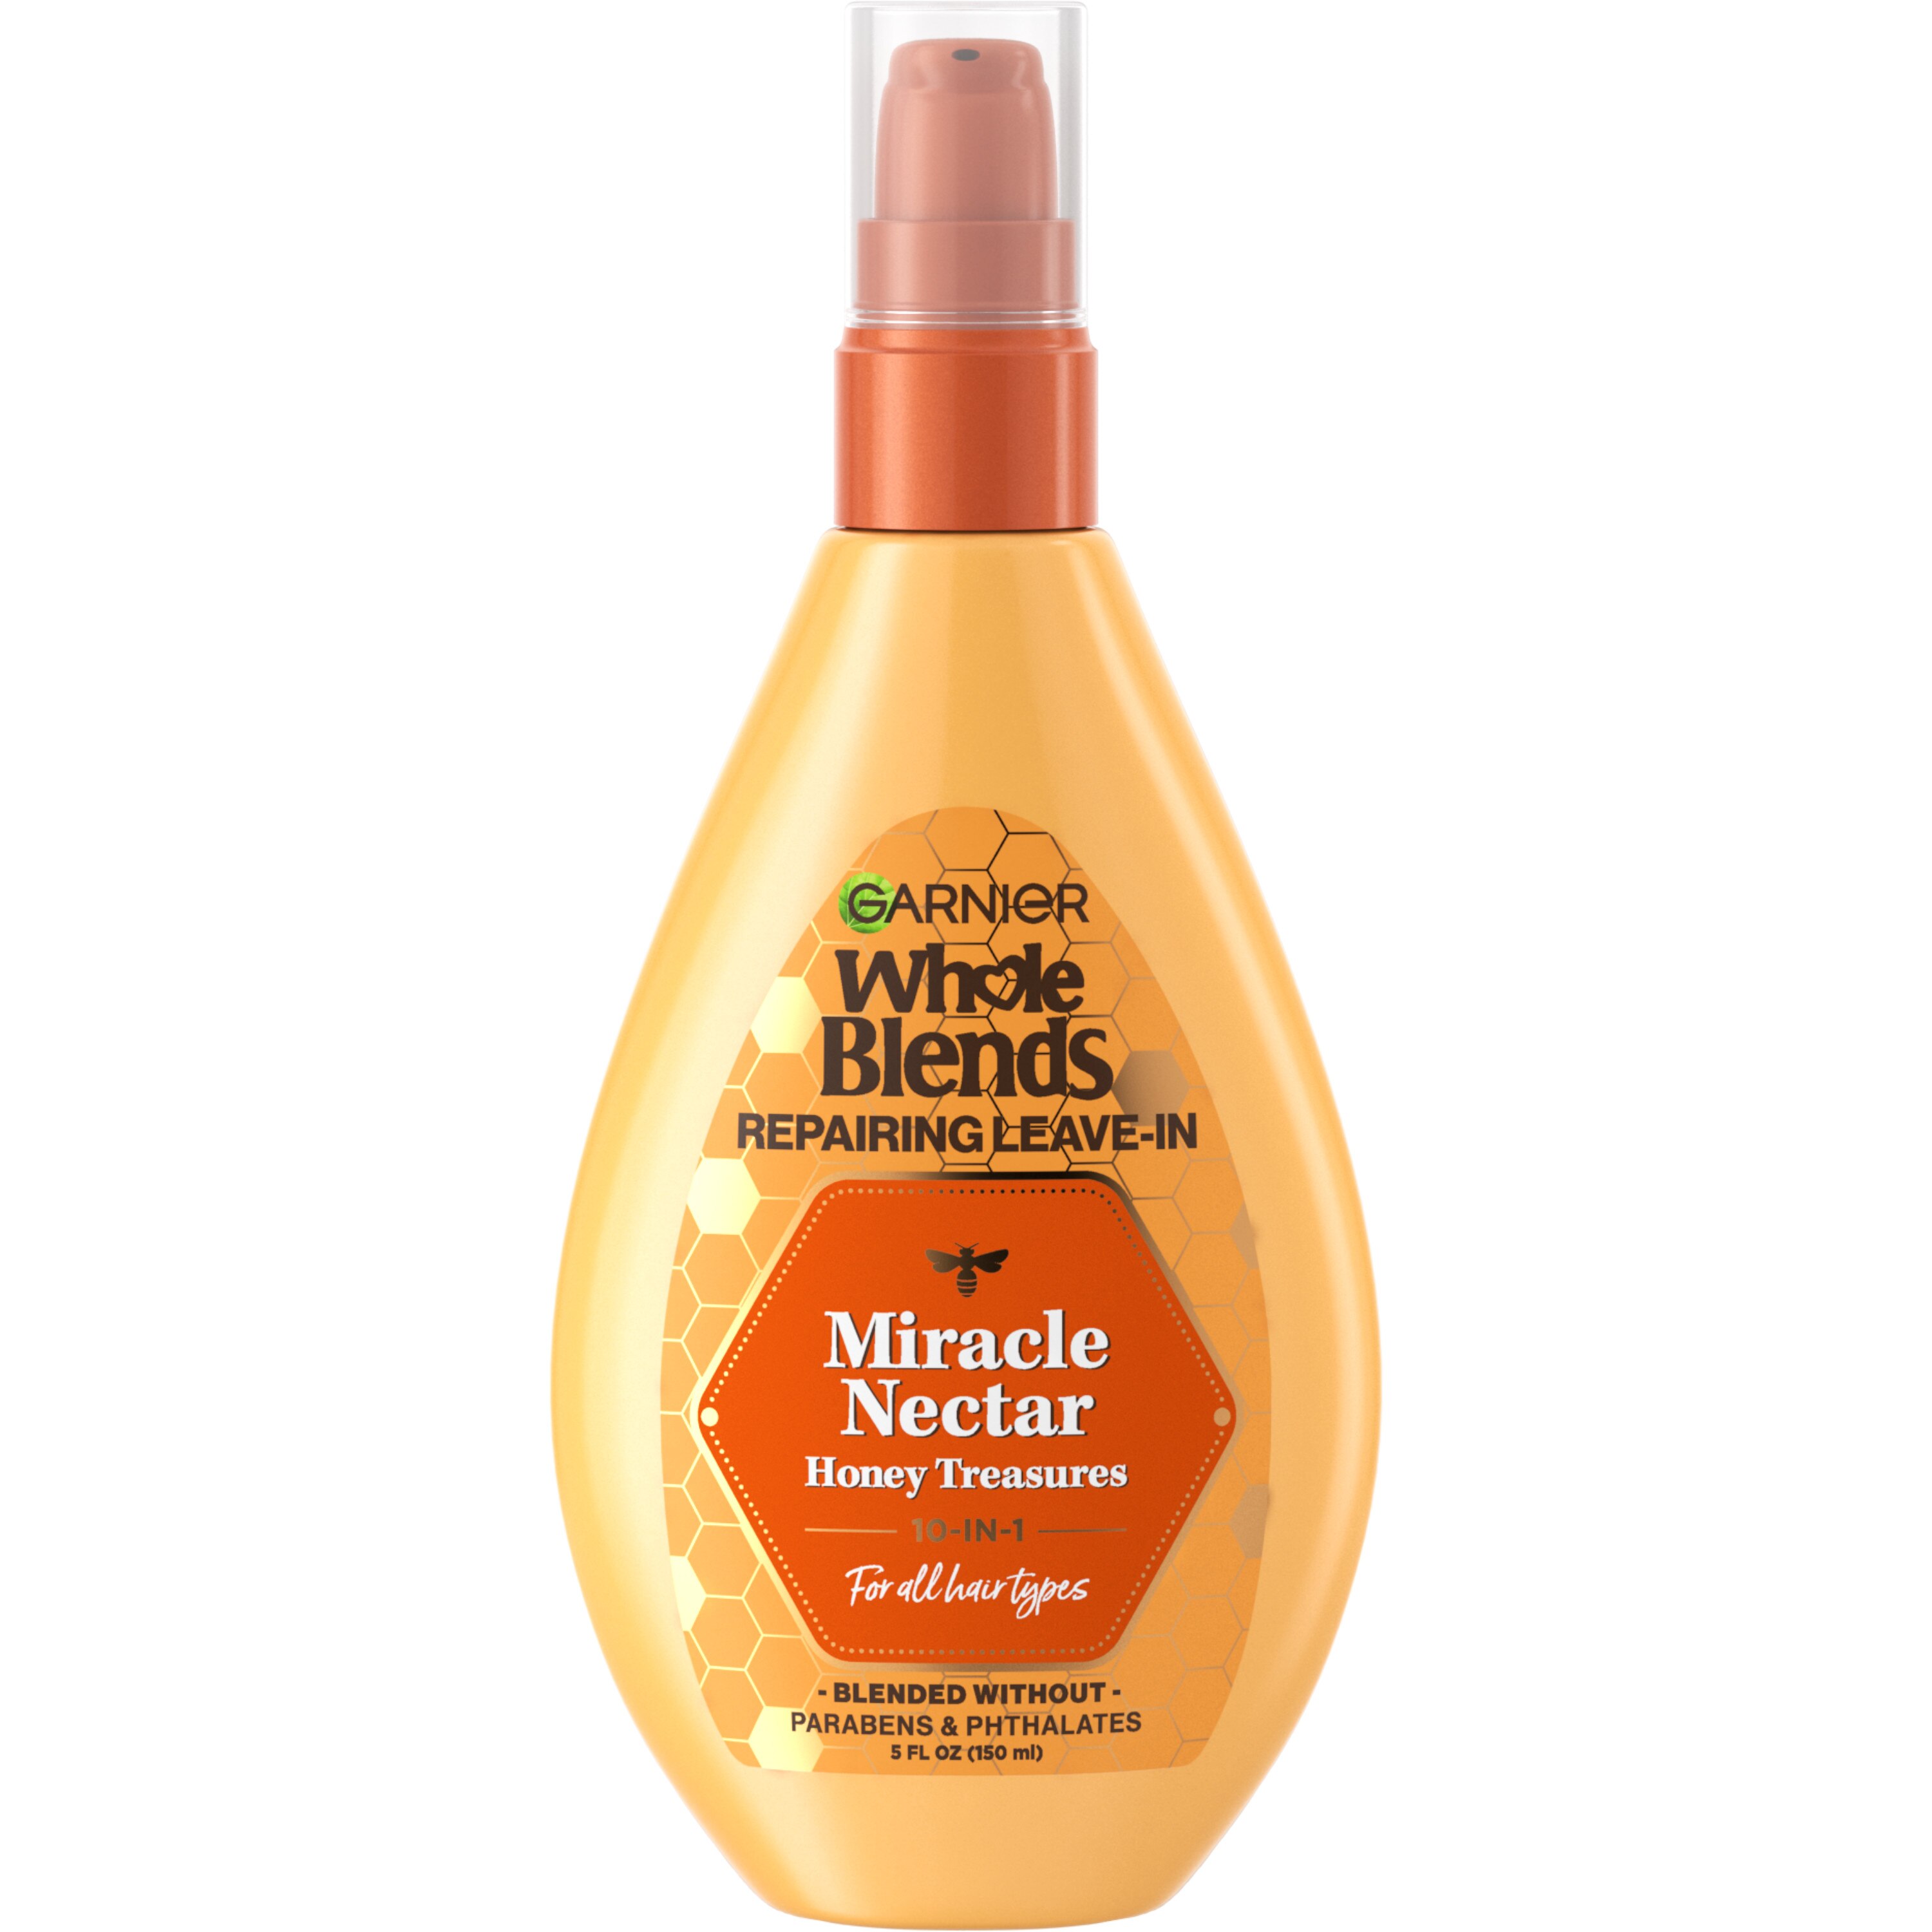 Garnier Whole Blends Leave-In Miracle Nectar Honey Treasures Treatment, 5 OZ